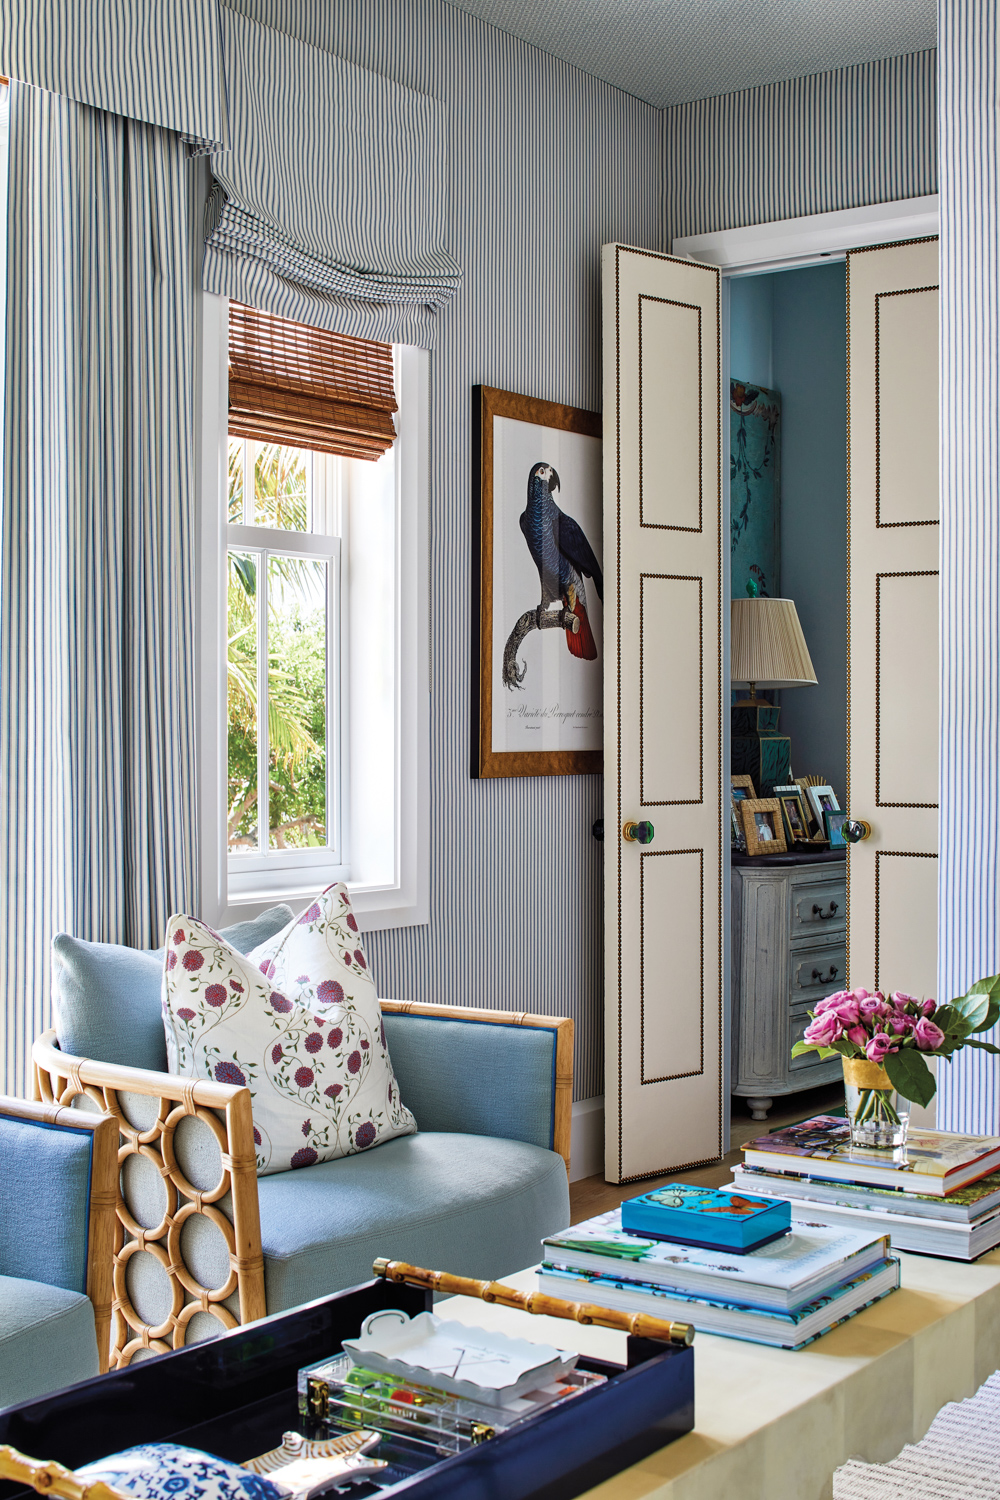 den with striped wallcovering, blue...